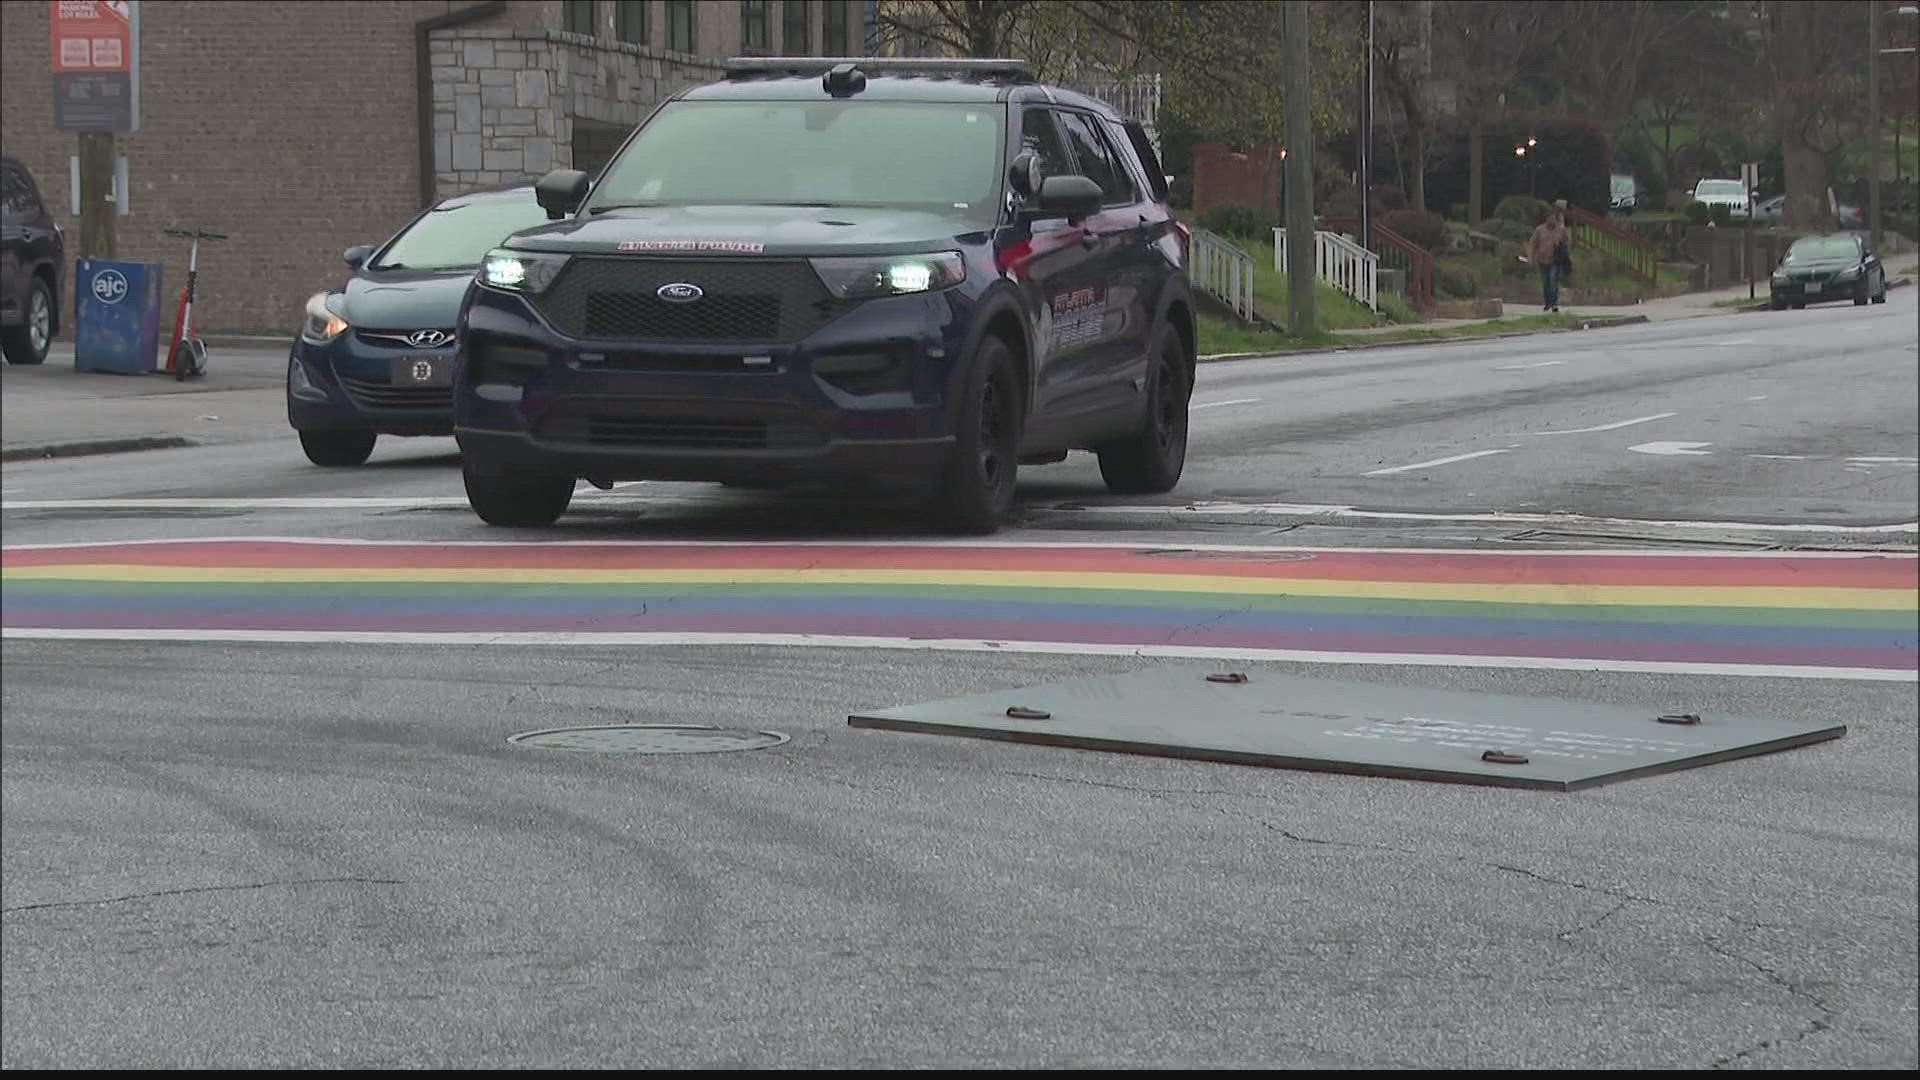 Metal plates to act as speed bumps and deter reckless driving in the area, police say.